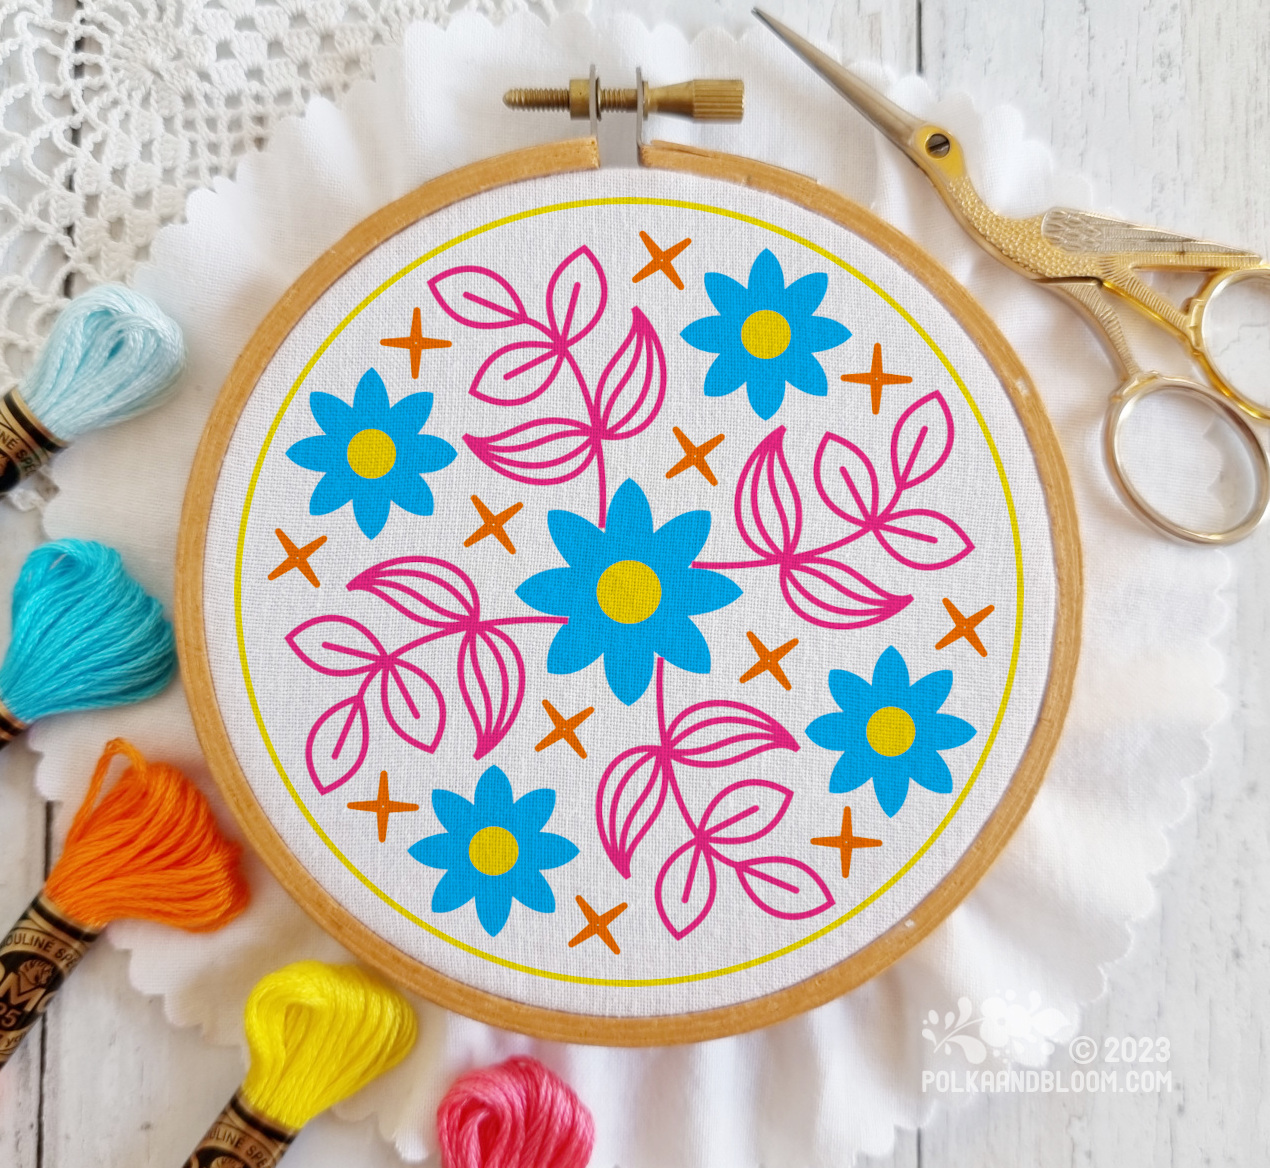 Small wooden embroidery hoop seen from above. There is white fabric in the hoop and the image is overlaid with a line drawing of blue flowers with pink leaves.